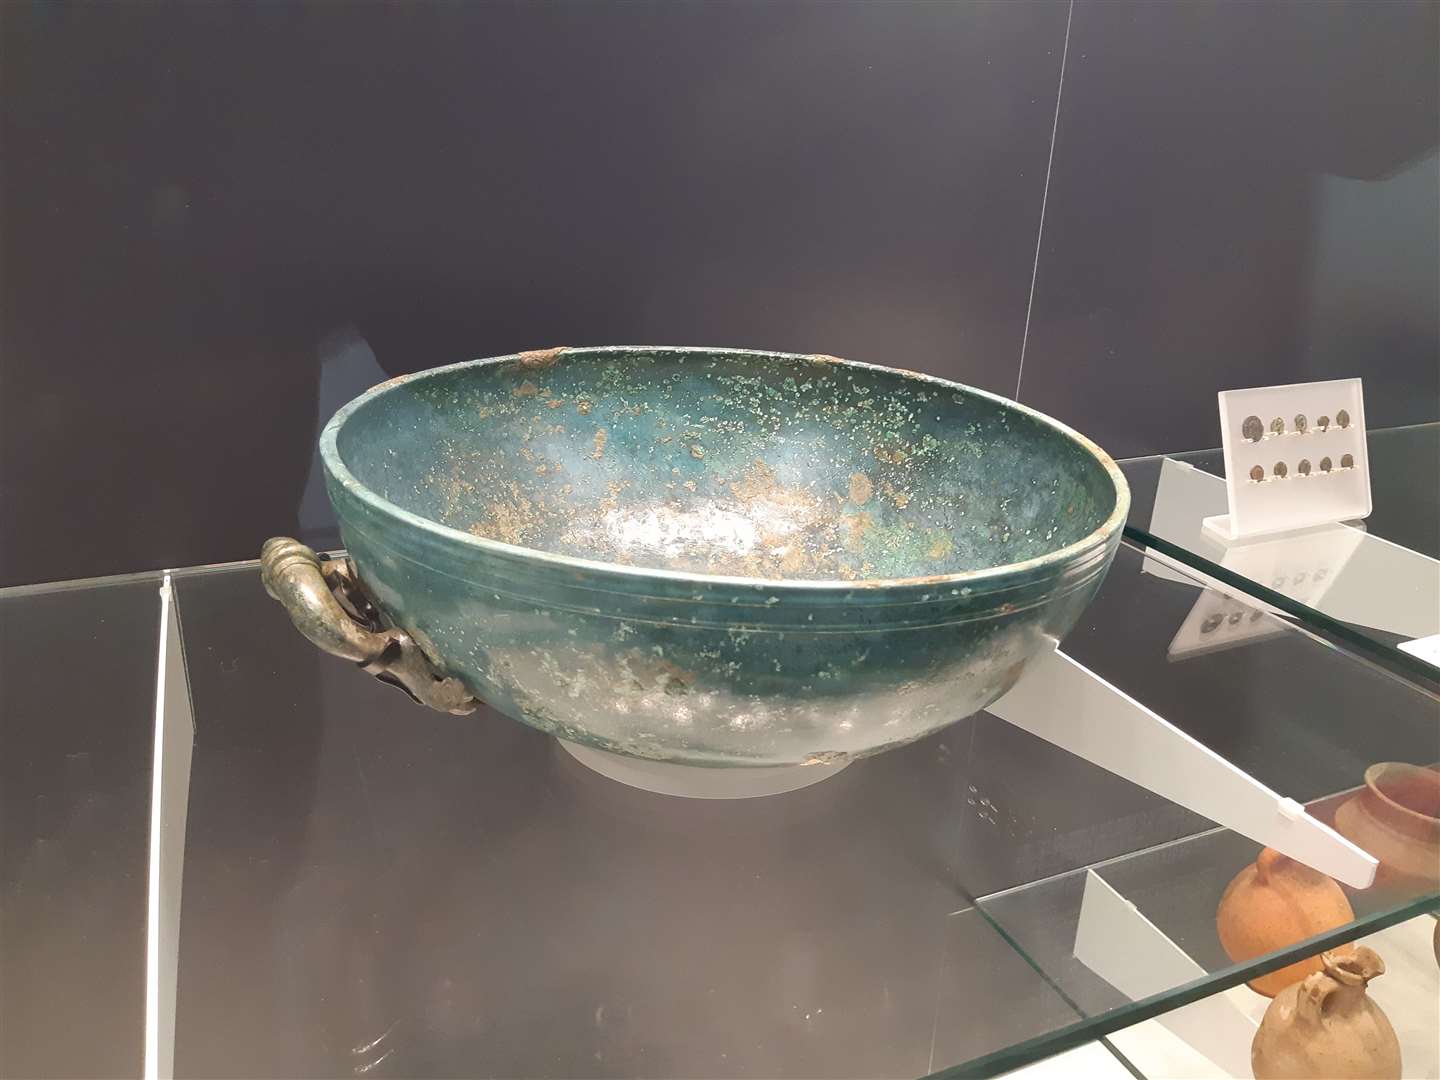 This Roman bowl, discovered underground between Sandwich and Wingham in late 2016, is one of the museum's oldest artefacts